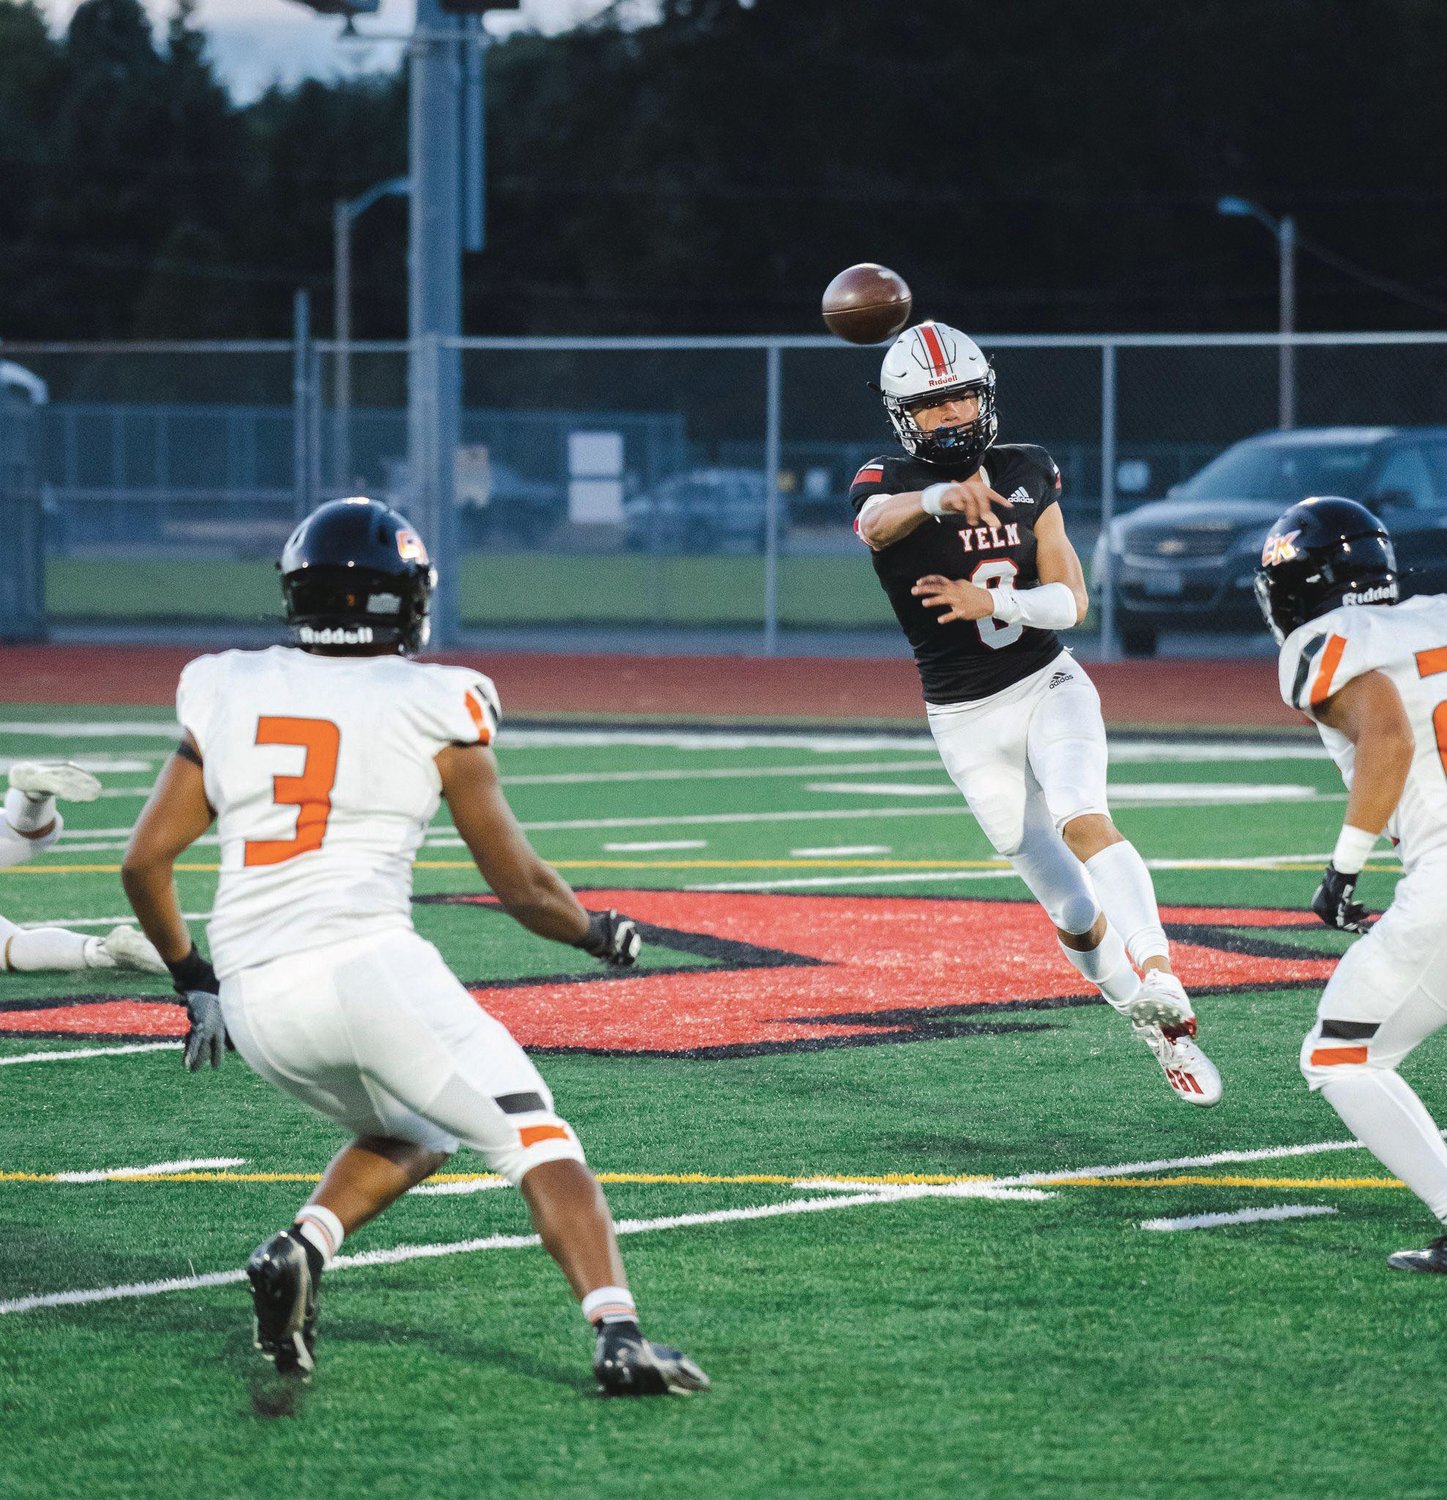 Quarterback Damian Aalona attempts a pass against Central Kitsap on Friday, Sept. 16.